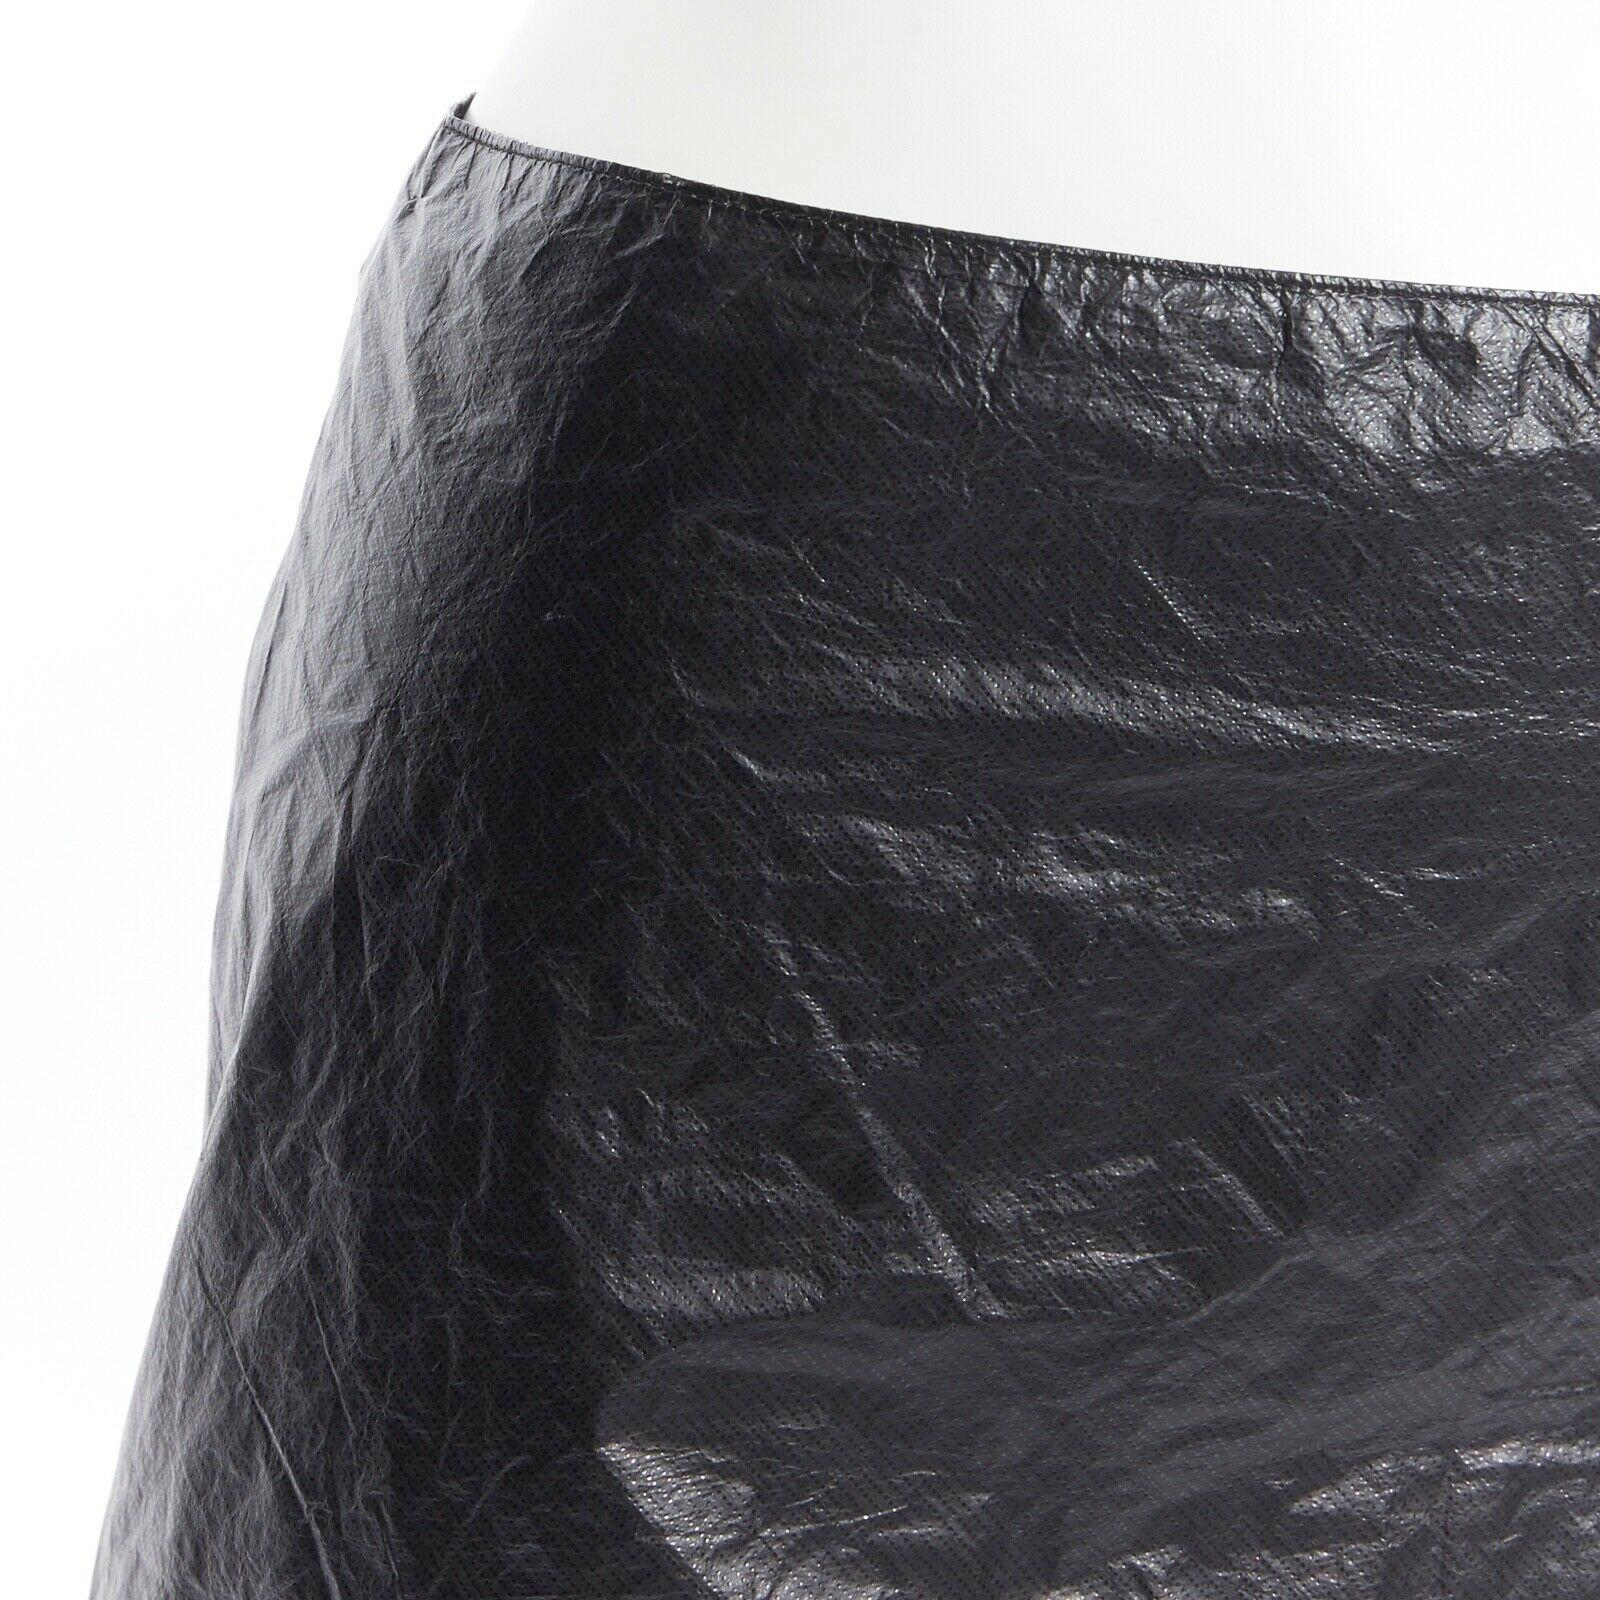 ANN DEMEULEMEESTER black polyethylene plastic bin bag mini skirt FR38 M 
Reference: TGAS/A03272
Brand: Ann Demeulemeester
Designer: Ann Demeulemeester
Material: Polyester 
Color: Black
Pattern: Solid
Closure: Zip
Extra Detail: High waisted